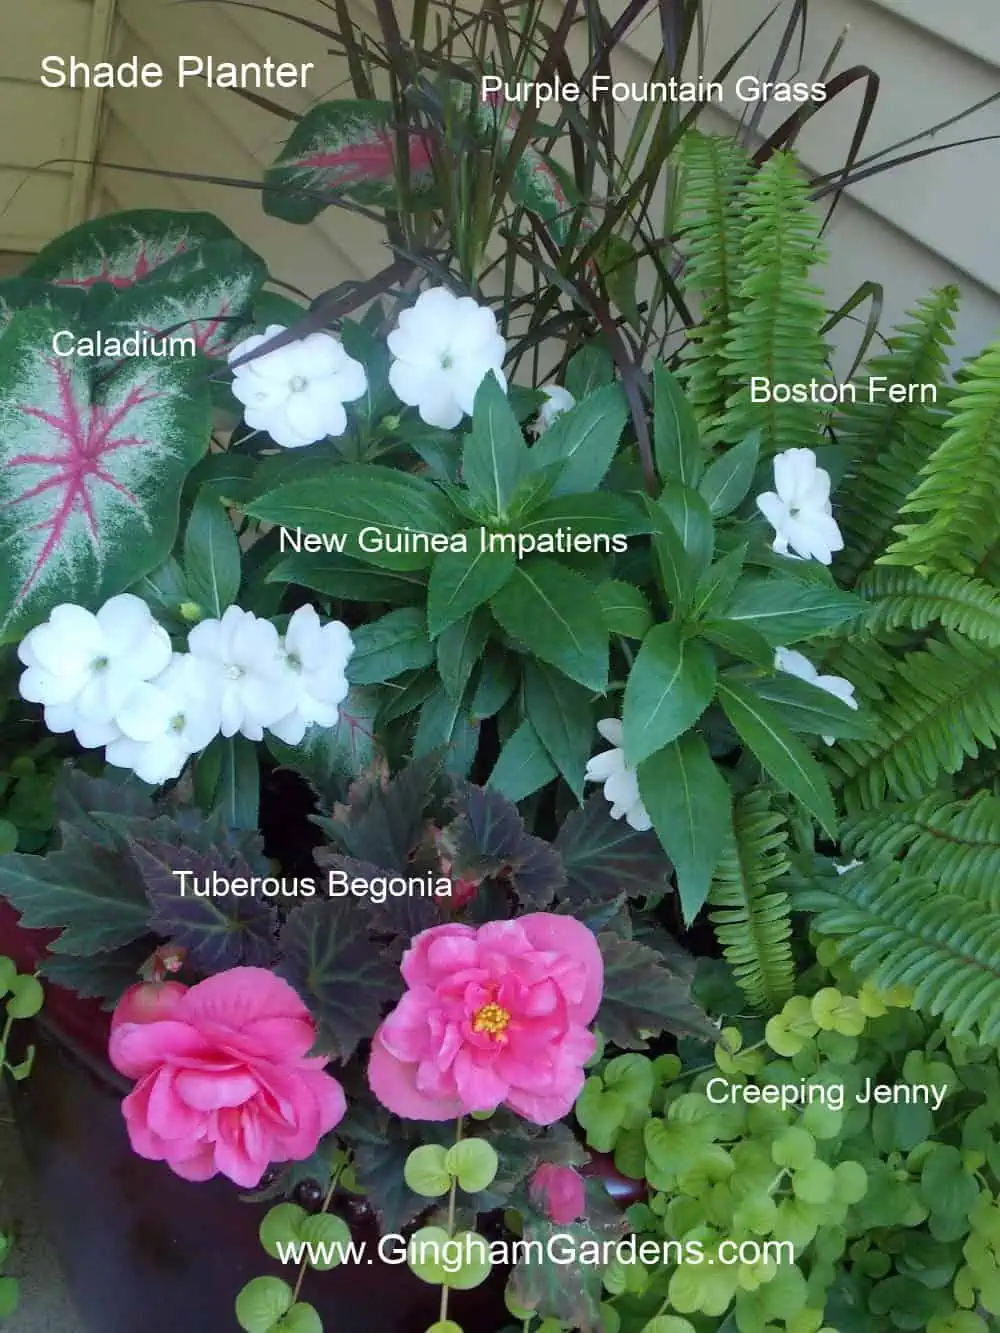 Shade container with purple fountain grass, caladium, white new guinea impatiens, pink begonia, boston fern and creeping jenny